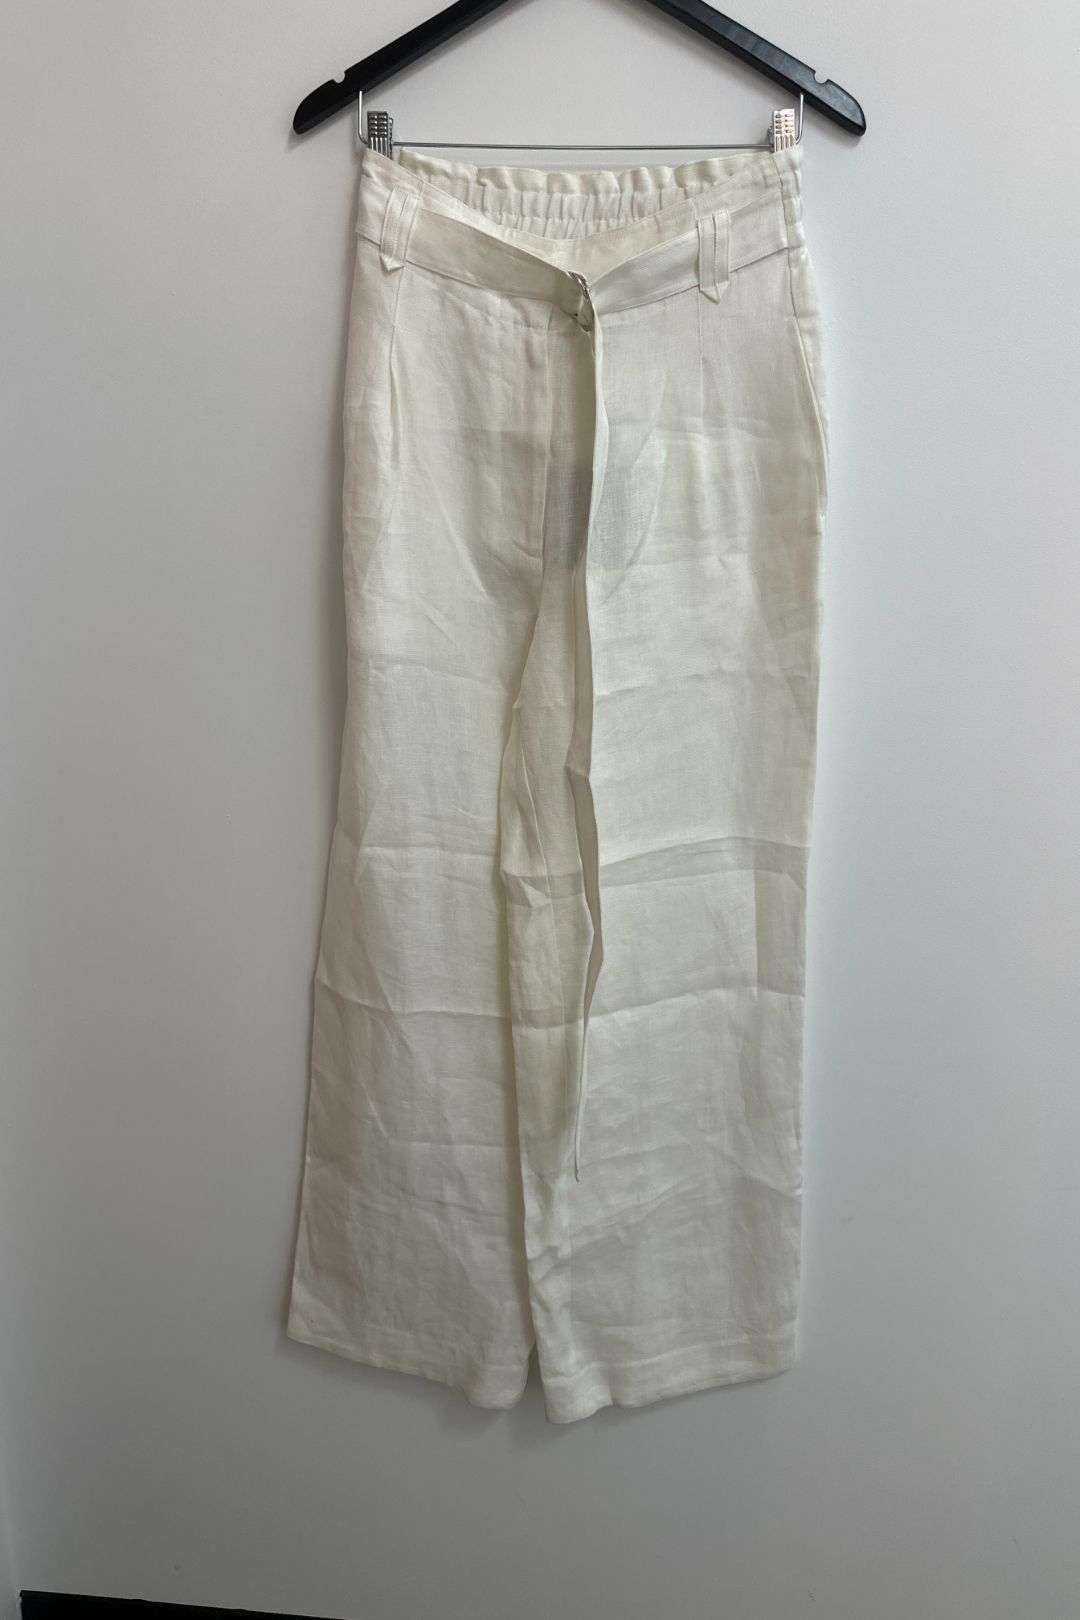 Lee Mathews Amos Relaxed Linen Pant in Natural